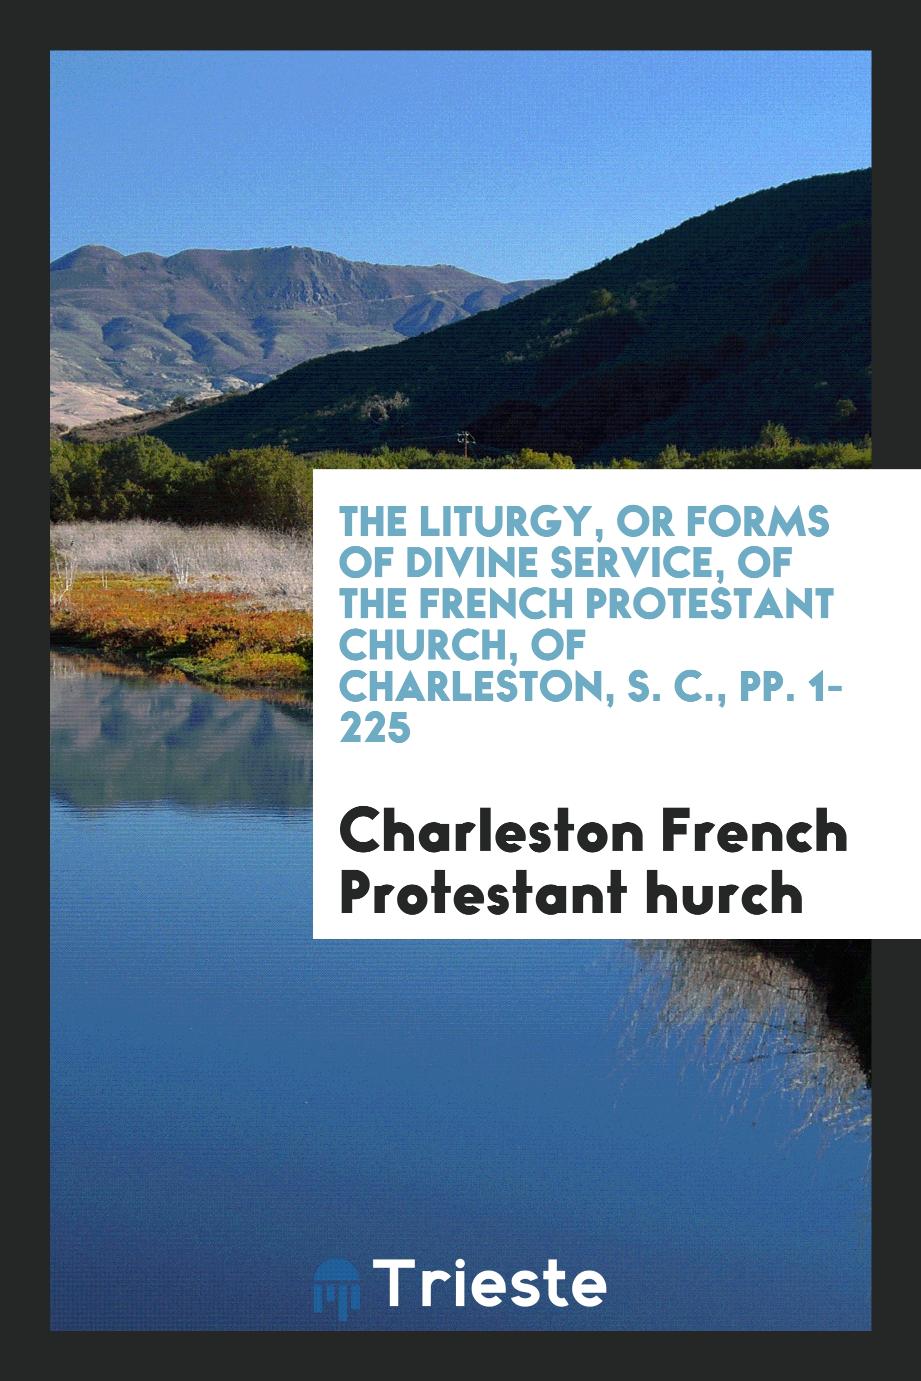 The Liturgy, or Forms of Divine Service, of the French Protestant Church, of Charleston, S. C., pp. 1-225